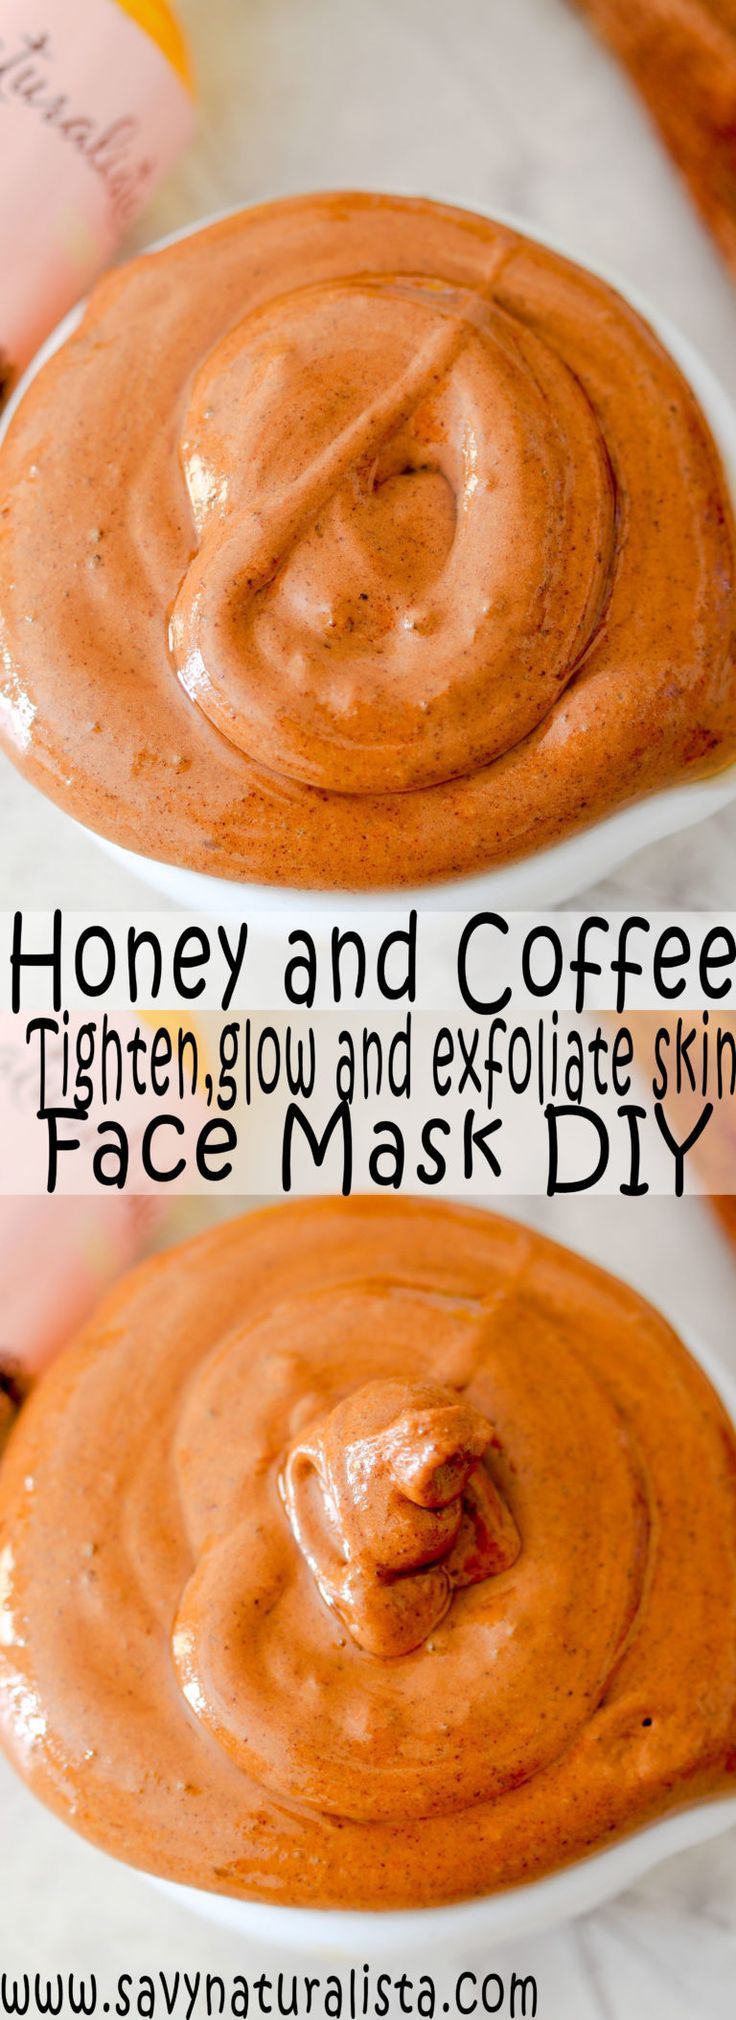 Coffee and Honey for Tighten Skin Face Mask - Savvy Naturalista - Coffee and Honey for Tighten Skin Face Mask - Savvy Naturalista -   12 best diy Face Mask ideas